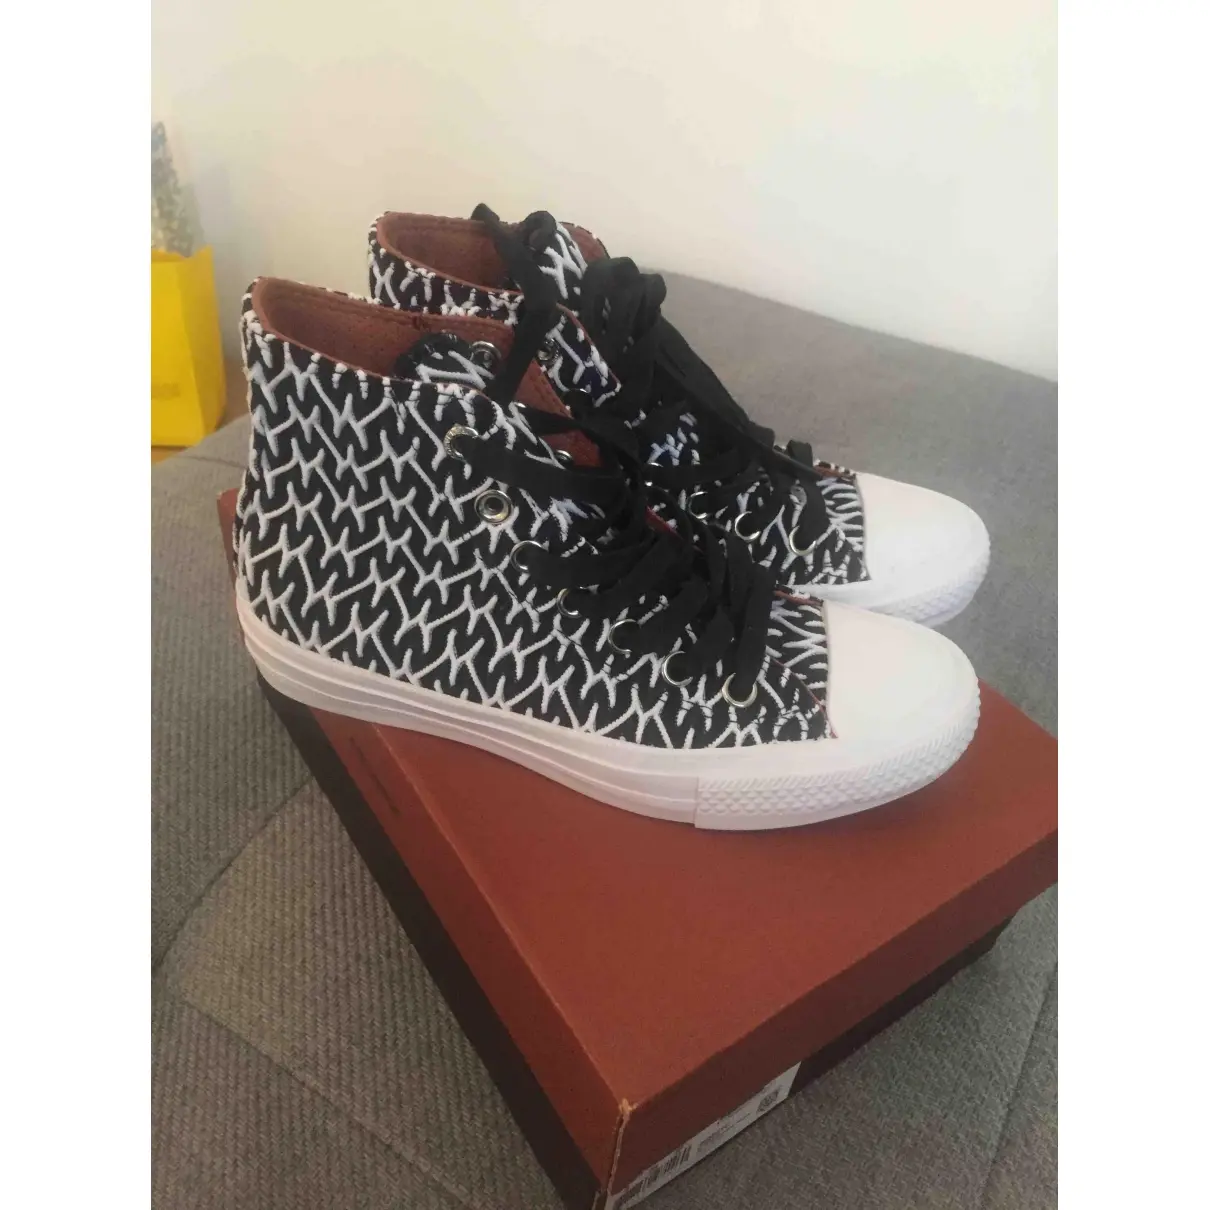 Missoni x Converse Cloth trainers for sale